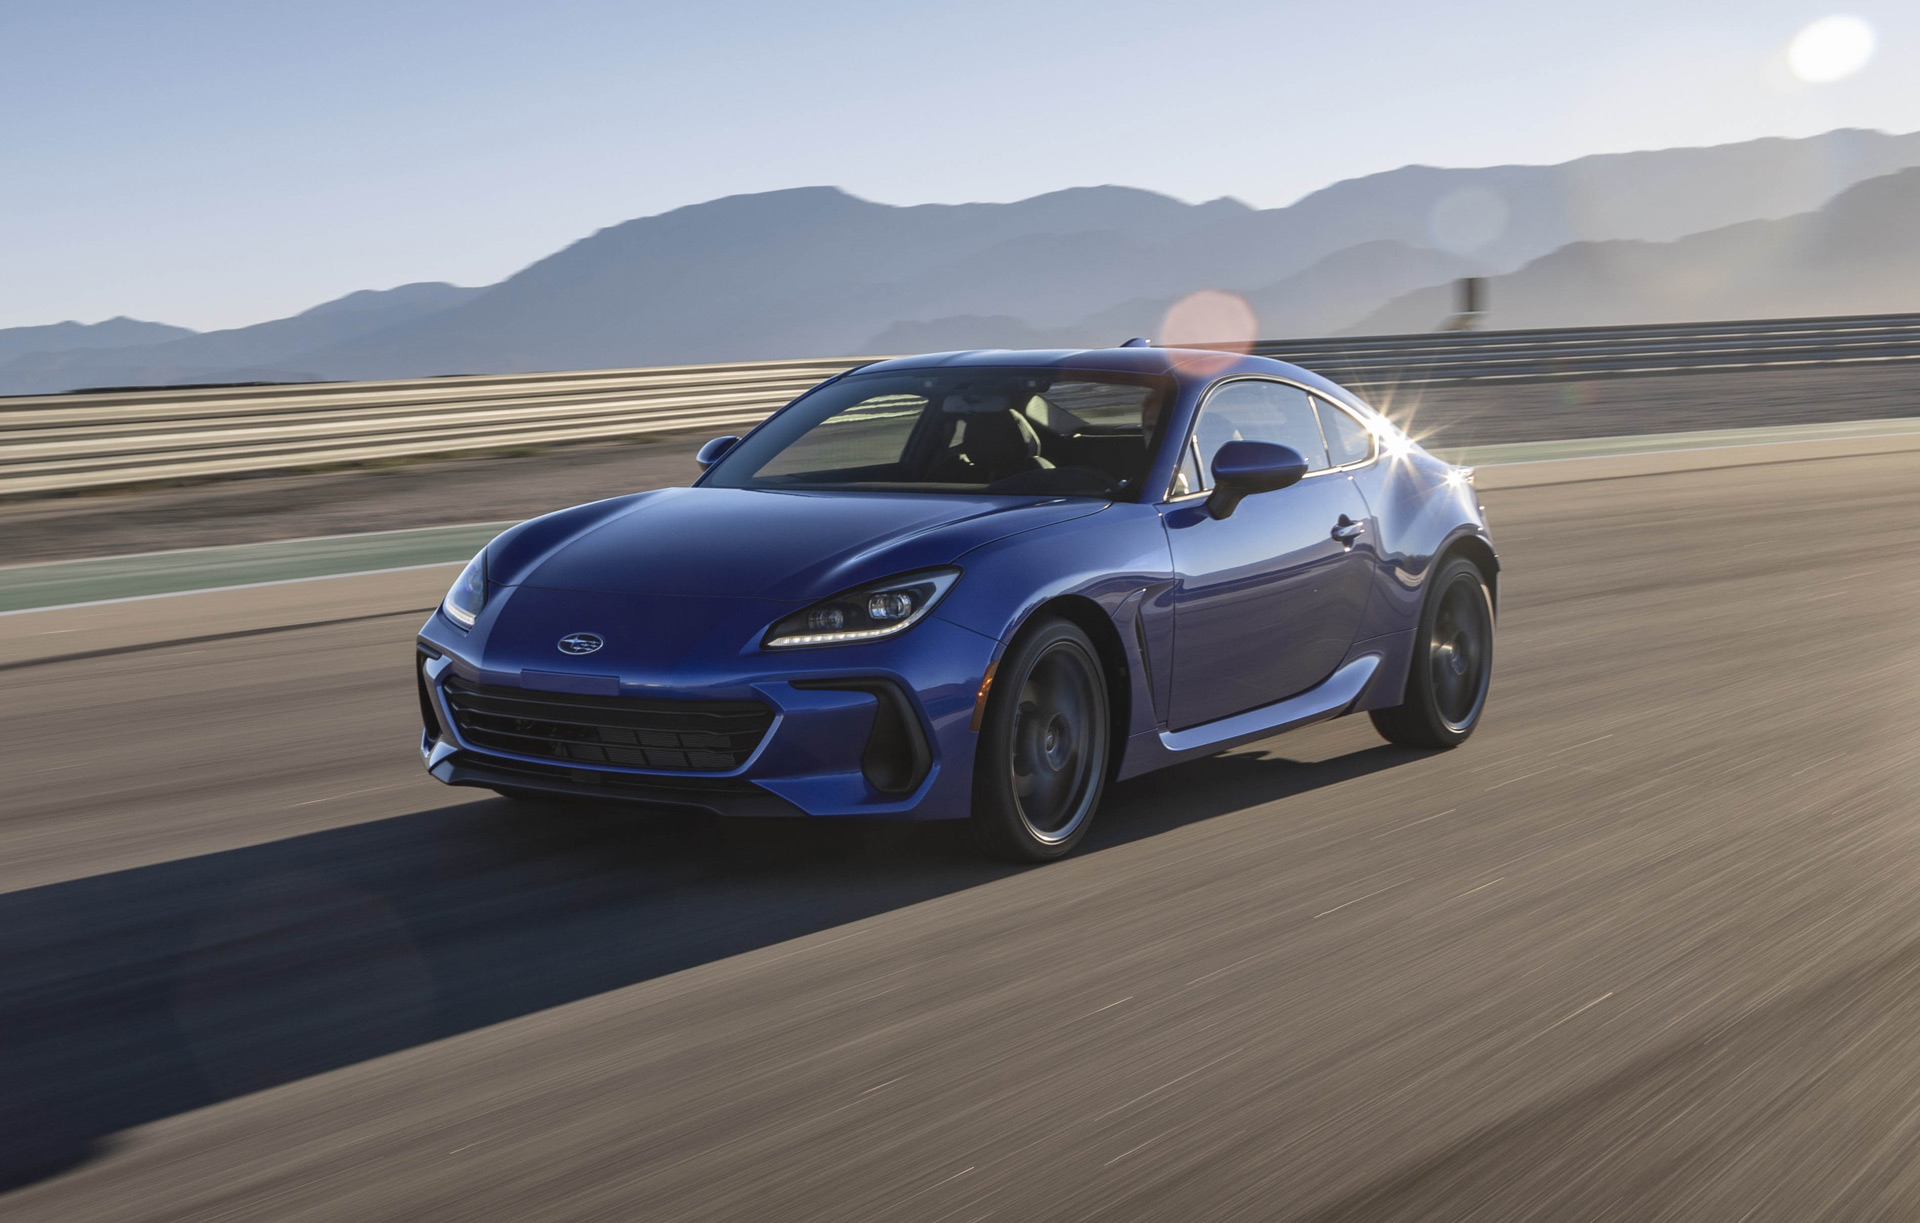 The 2023 Subaru BRZ: A Car that Will Make You the Envy of All